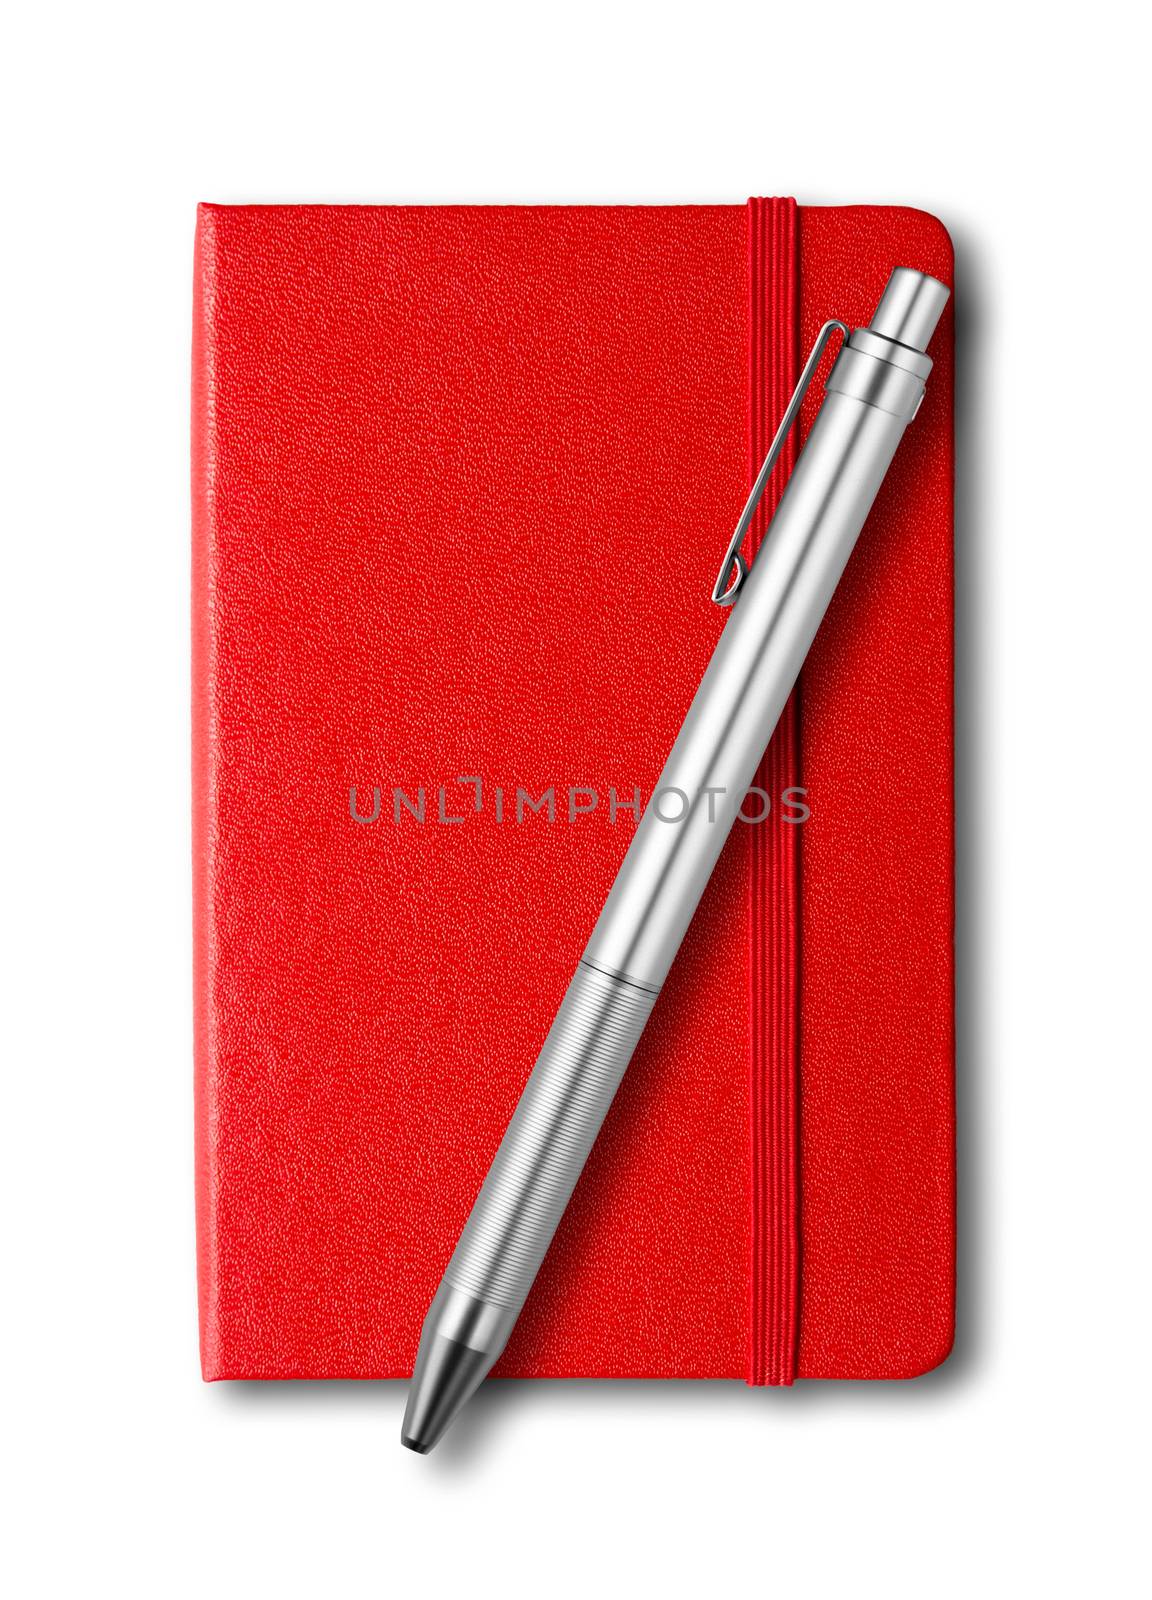 Red closed notebook and pen mockup isolated on white